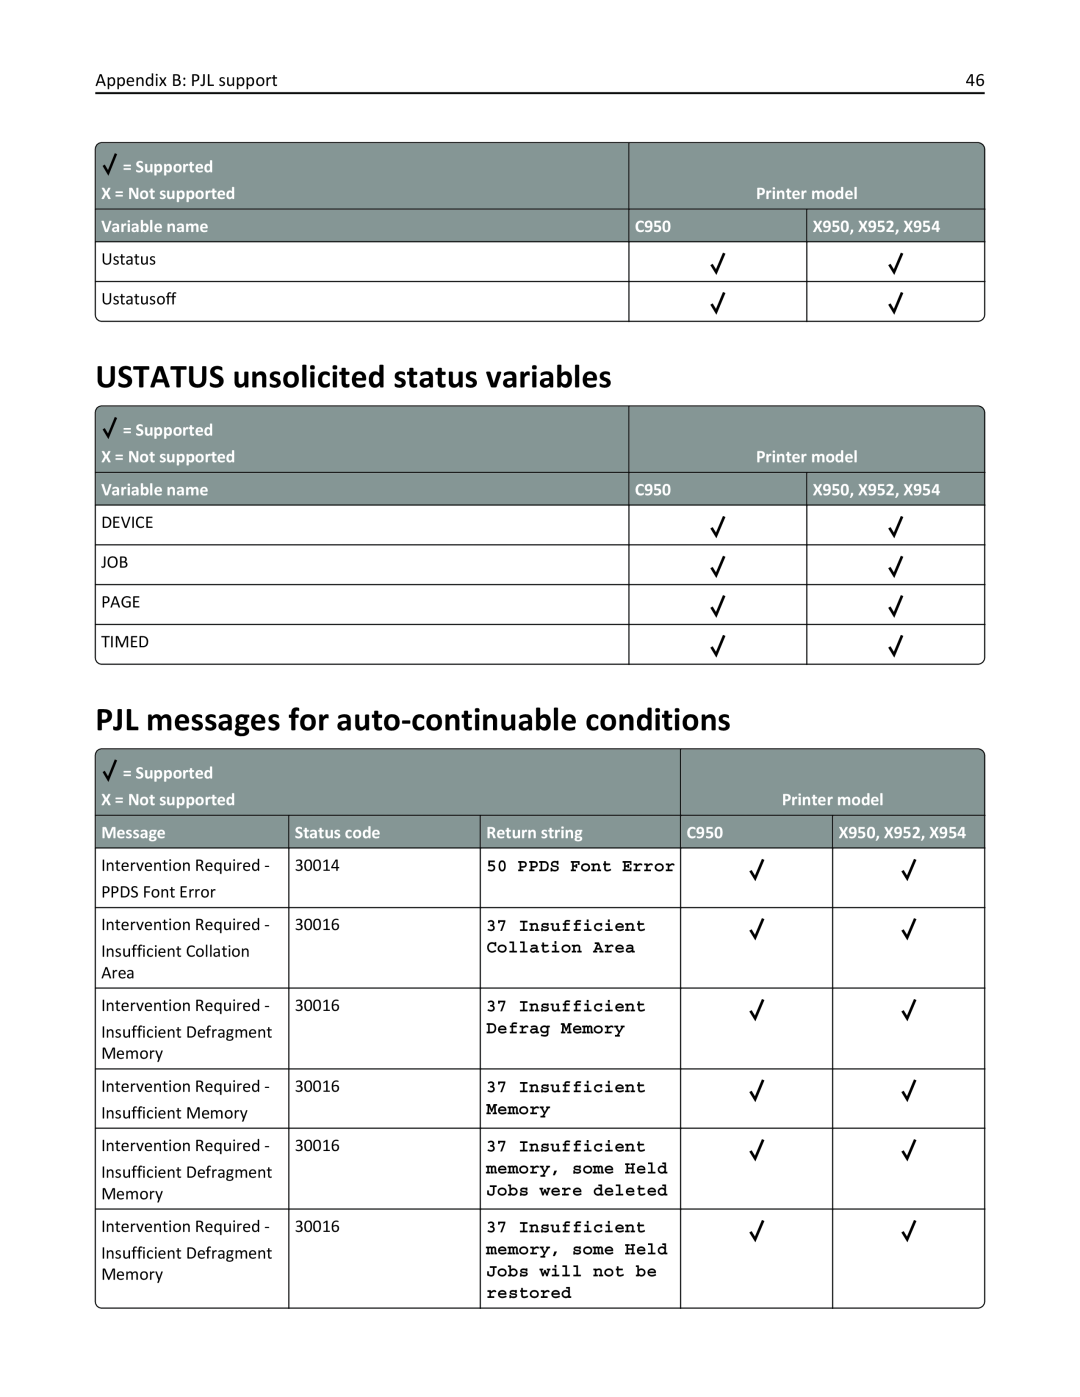 Lexmark 950DE USTATUS unsolicited status variables, PJL messages for auto-continuable conditions, Appendix B PJL support 